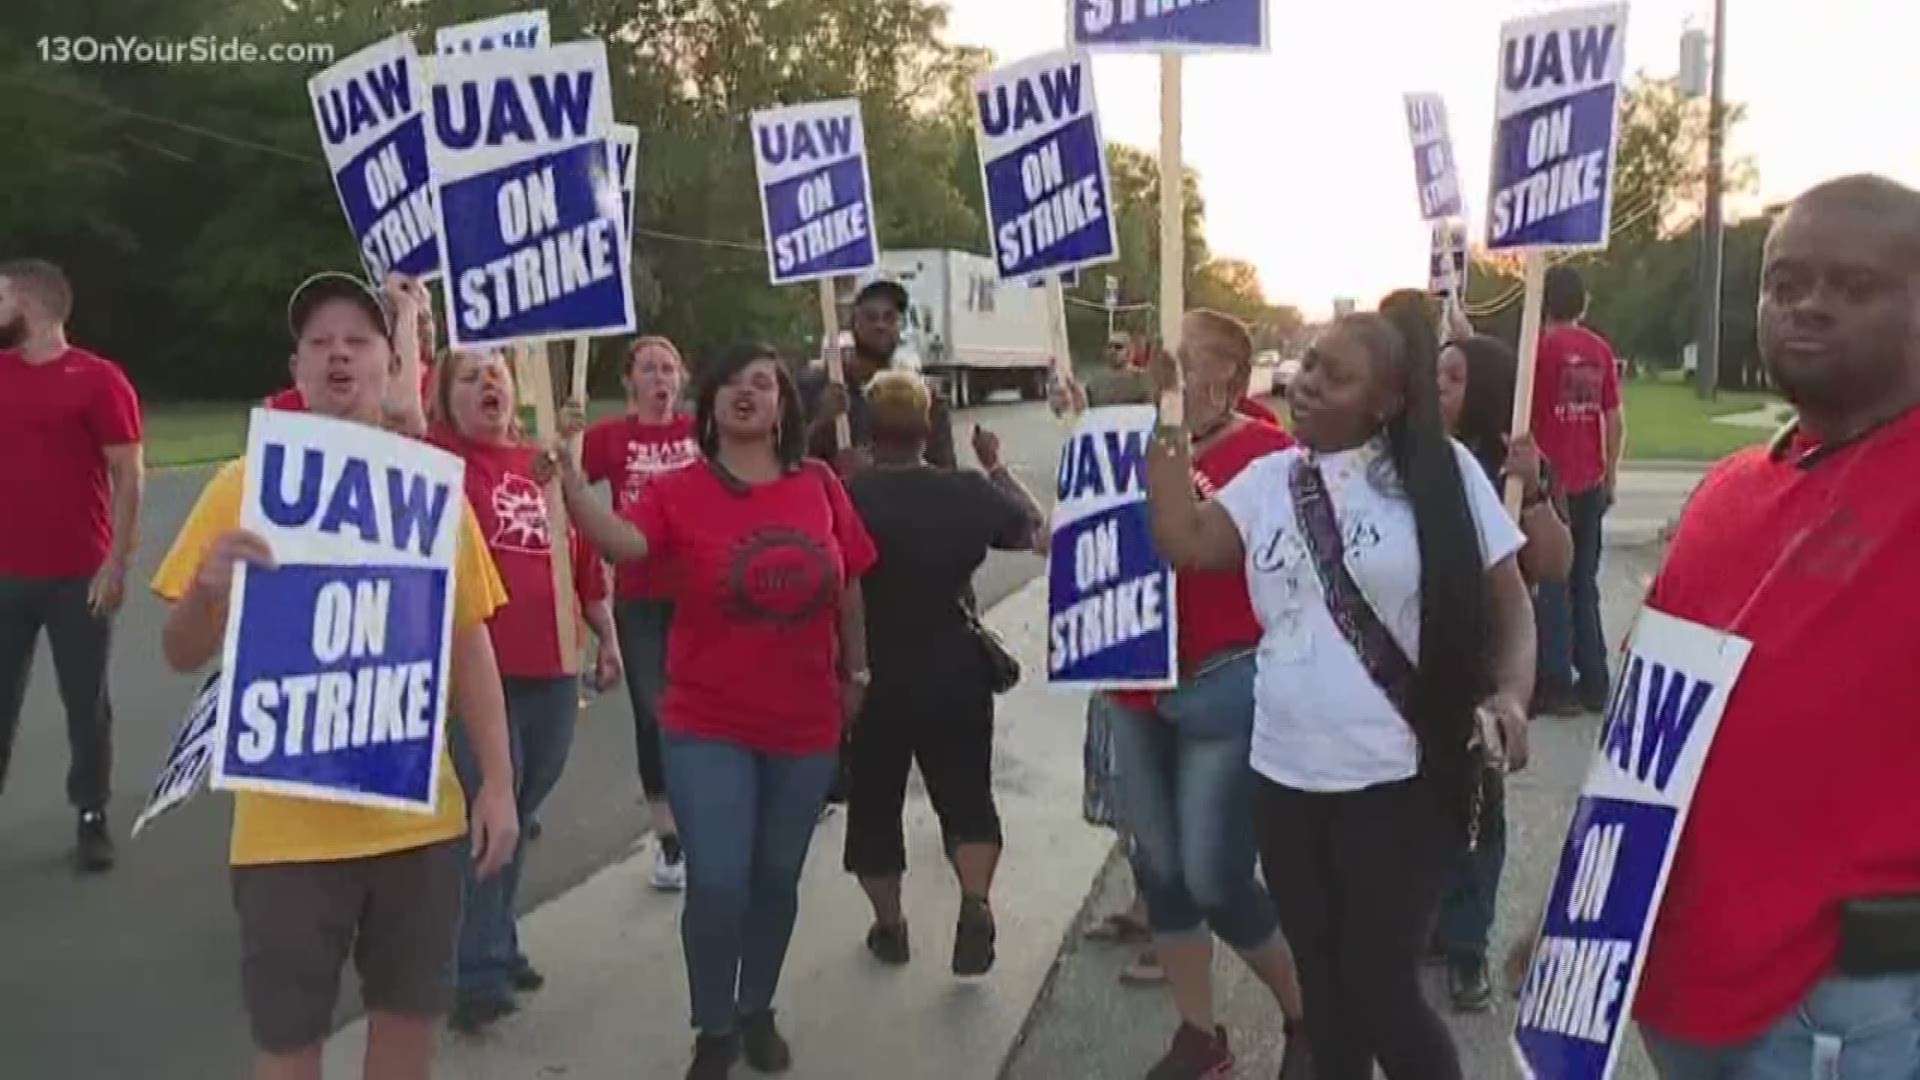 Contract talks aimed at ending a strike by 49,000 auto workers against General Motors have extended into late Monday afternoon. Both sides had agreed on about 2% of the contract language, leaving 98% left to negotiate.